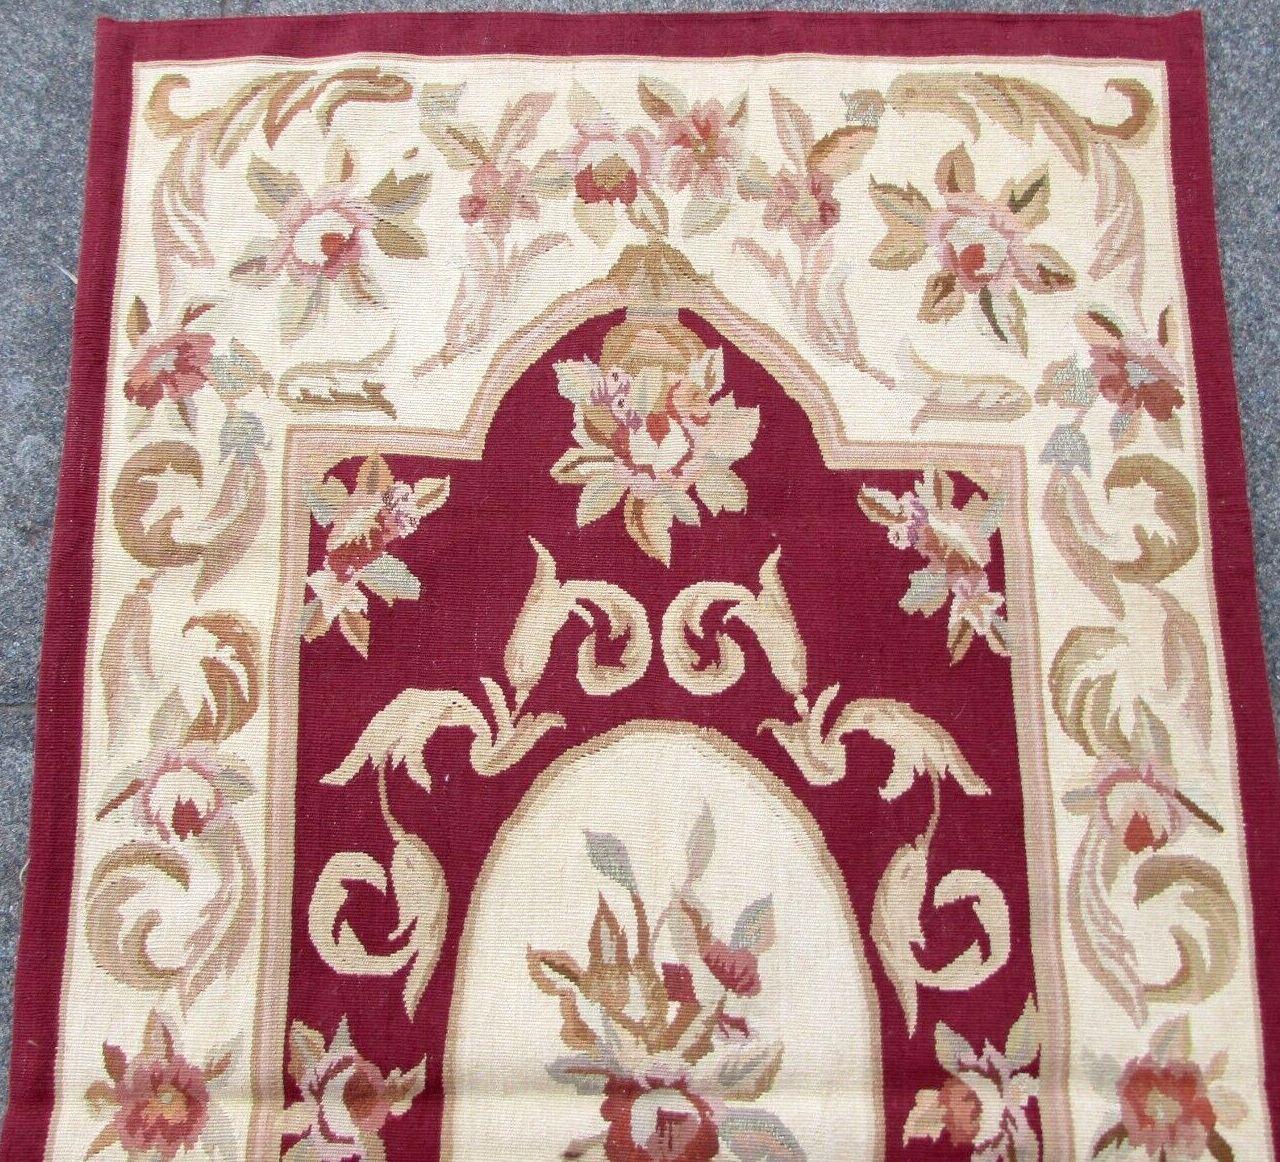 Handmade vintage Classic French Aubusson rug. It is from the end of 20th century in original good condition.

-Condition: Original good,

-circa 1980s,

-Size: 2.7' x 4.9' (78cm x 143cm),

-Material: Wool,

-Country of origin: